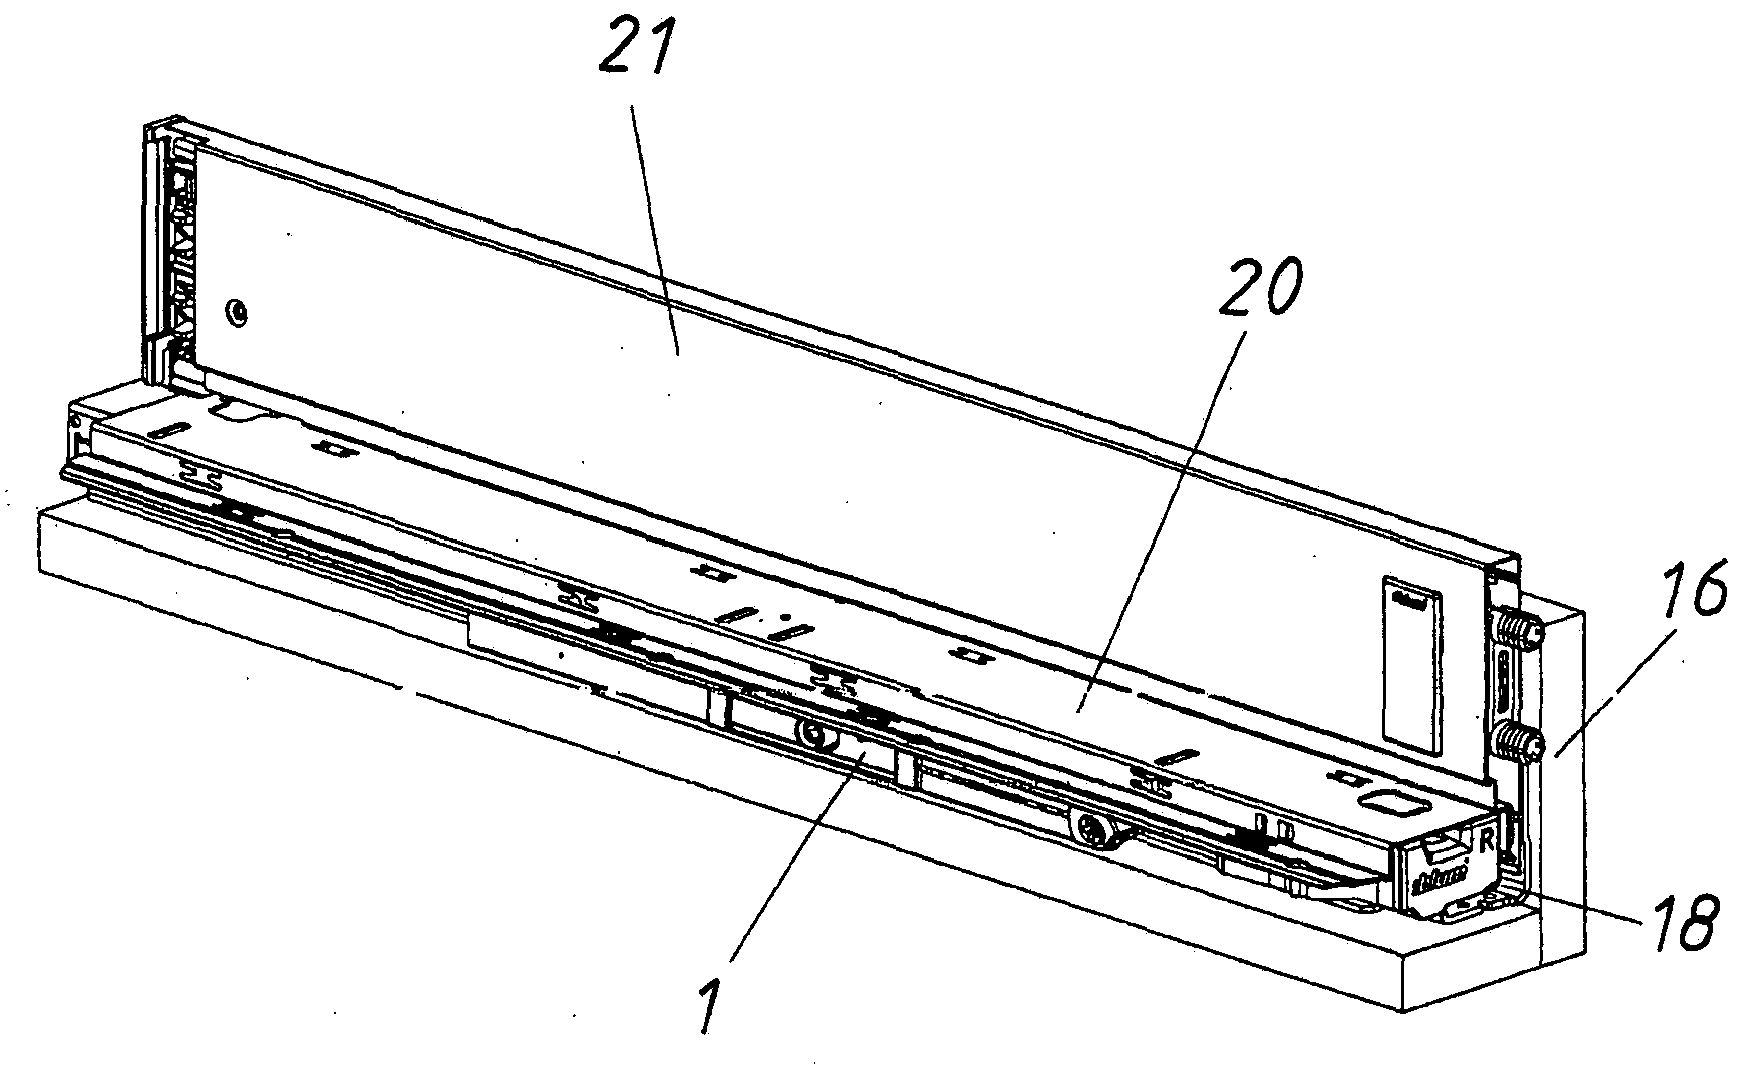 Lockable ejection device with overload mechanism